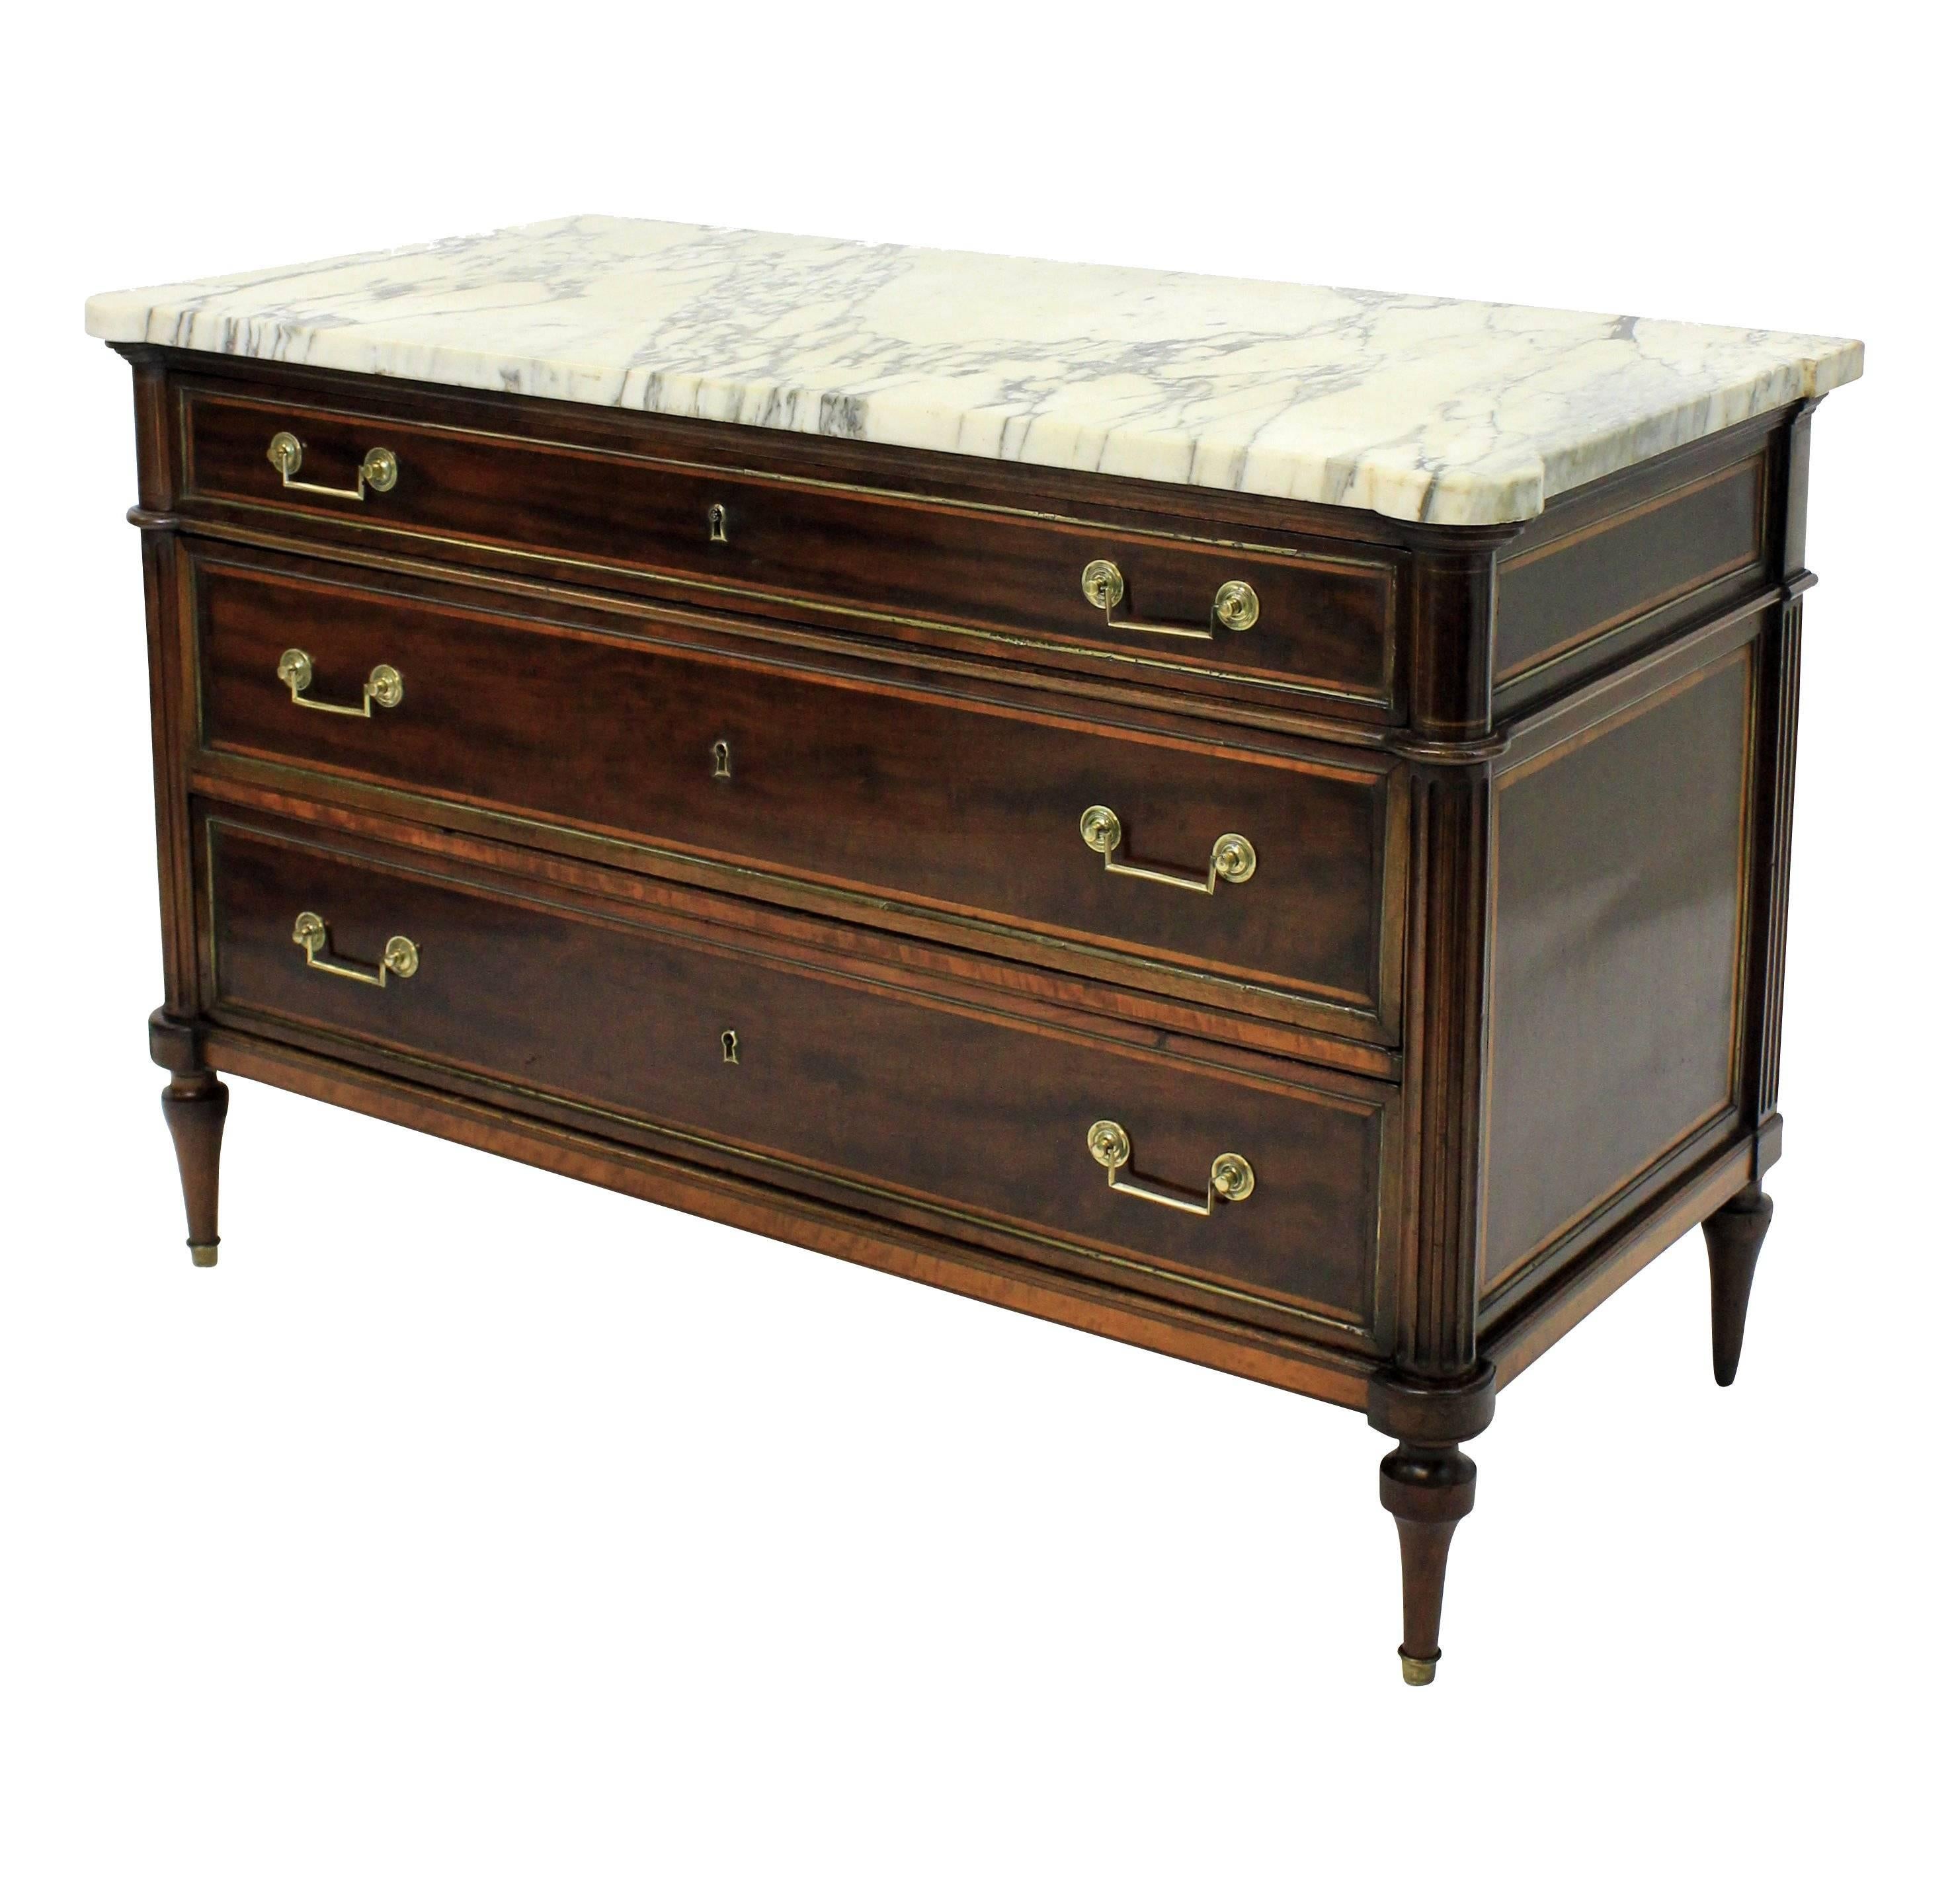 A fine French Directoire commode in mahogany with king wood borders. Brass inlay throughout, with it's original handles, sabot feet and stunning shaped marble top.
  